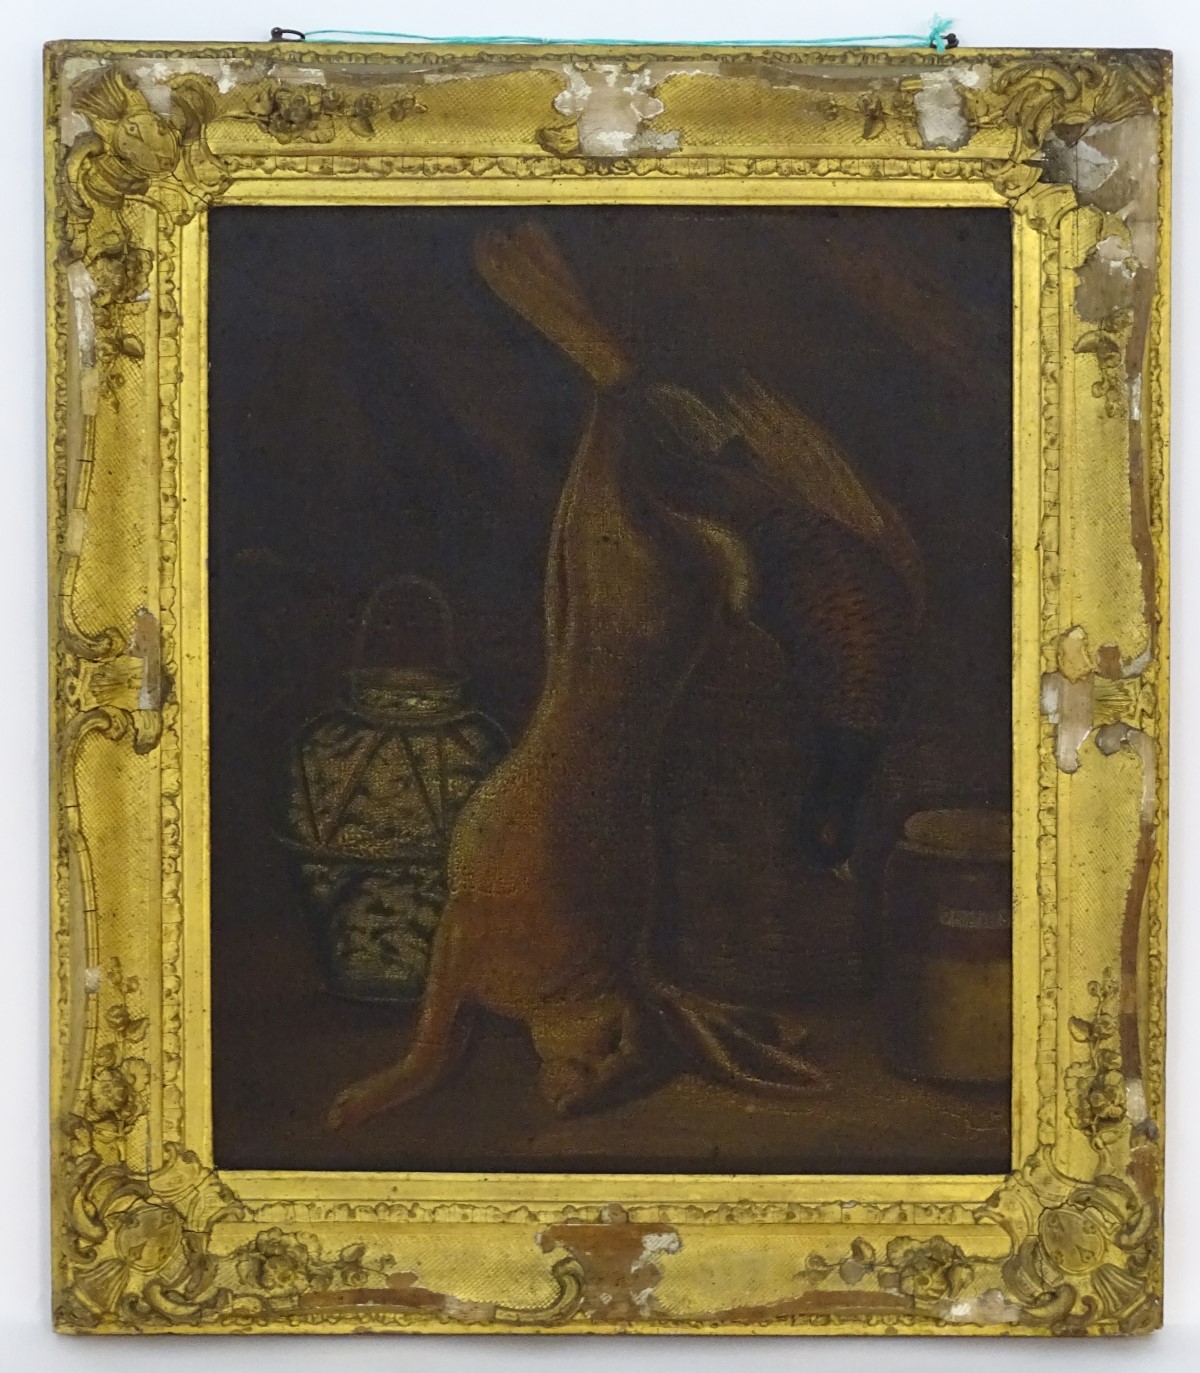 C. 1800 English School, Oil on canvas, The Day Bag ; hare, pheasants, Chinese vase , onions etc.